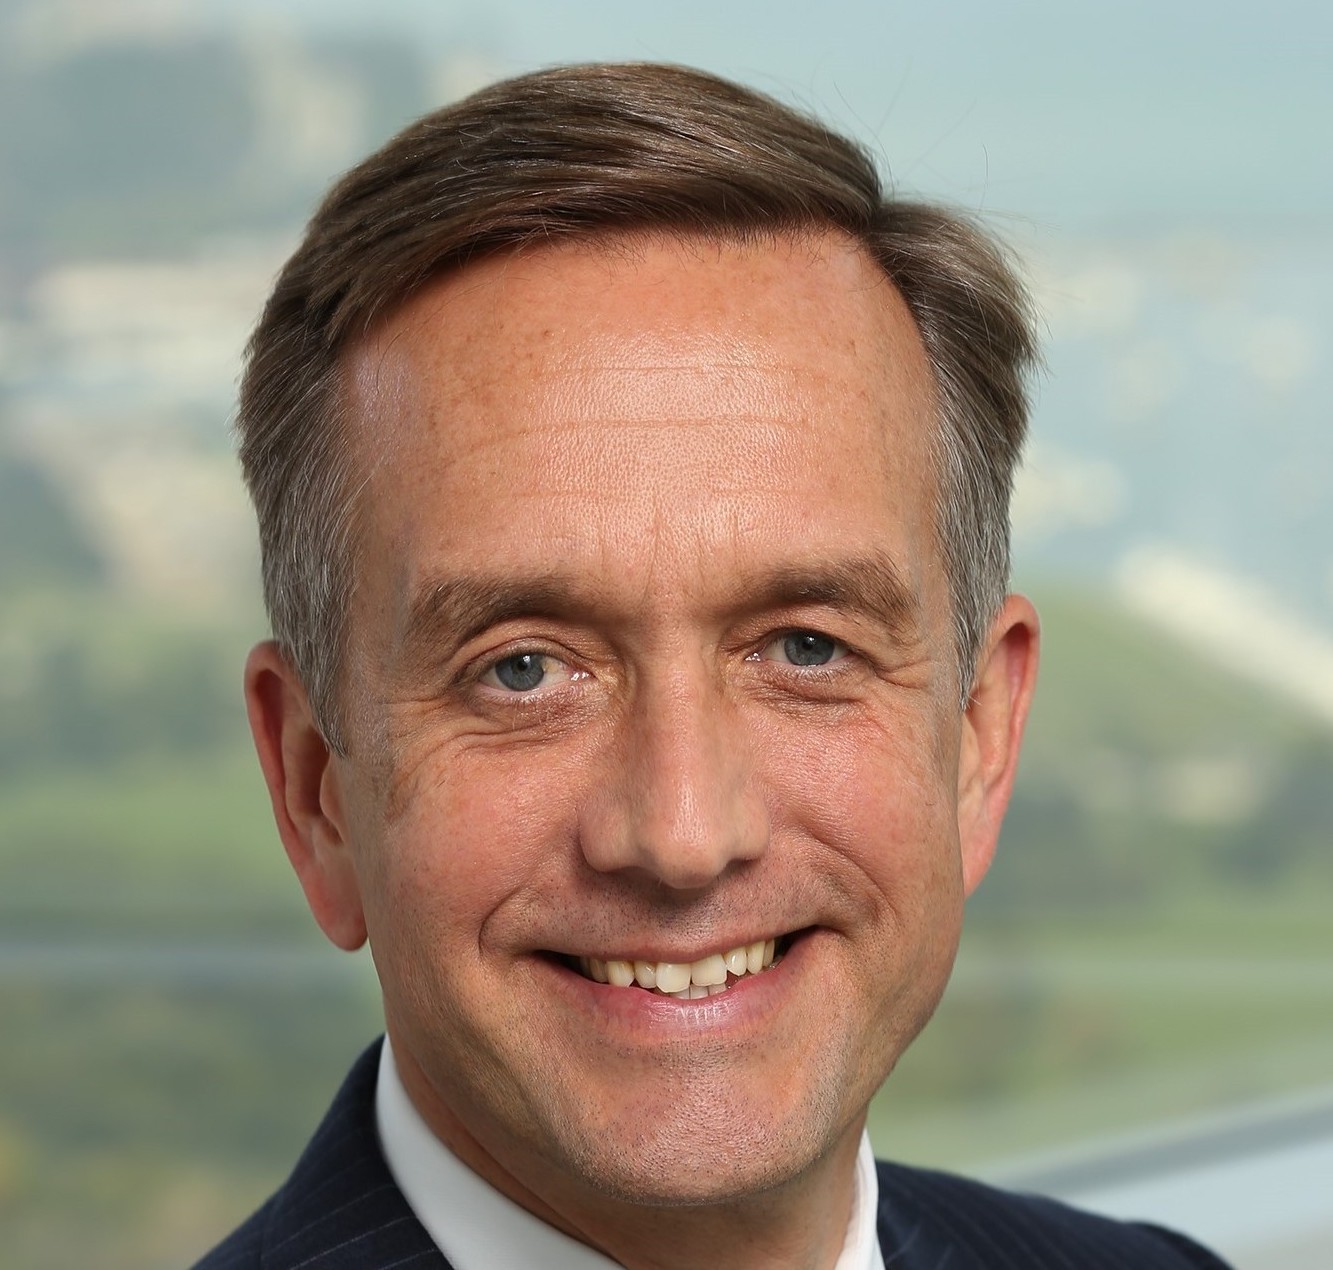 Mastercard appoints Tim Murphy as Chief Administrative Officer FX